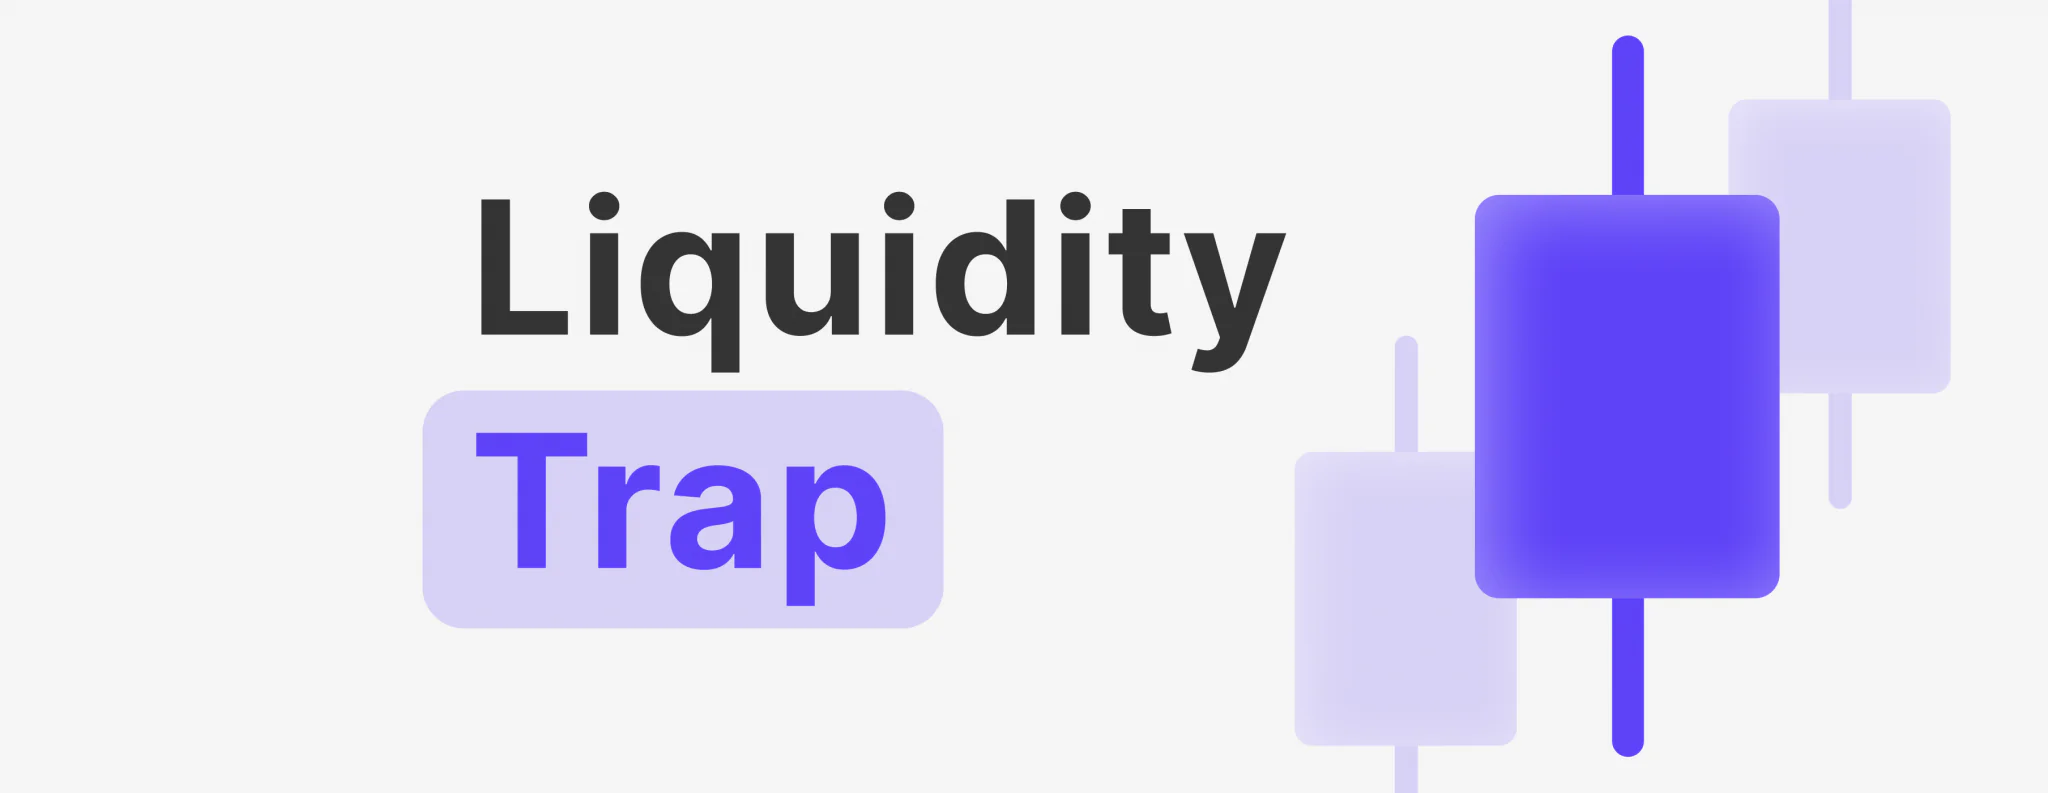 What Does Liquidity Trap Stand For